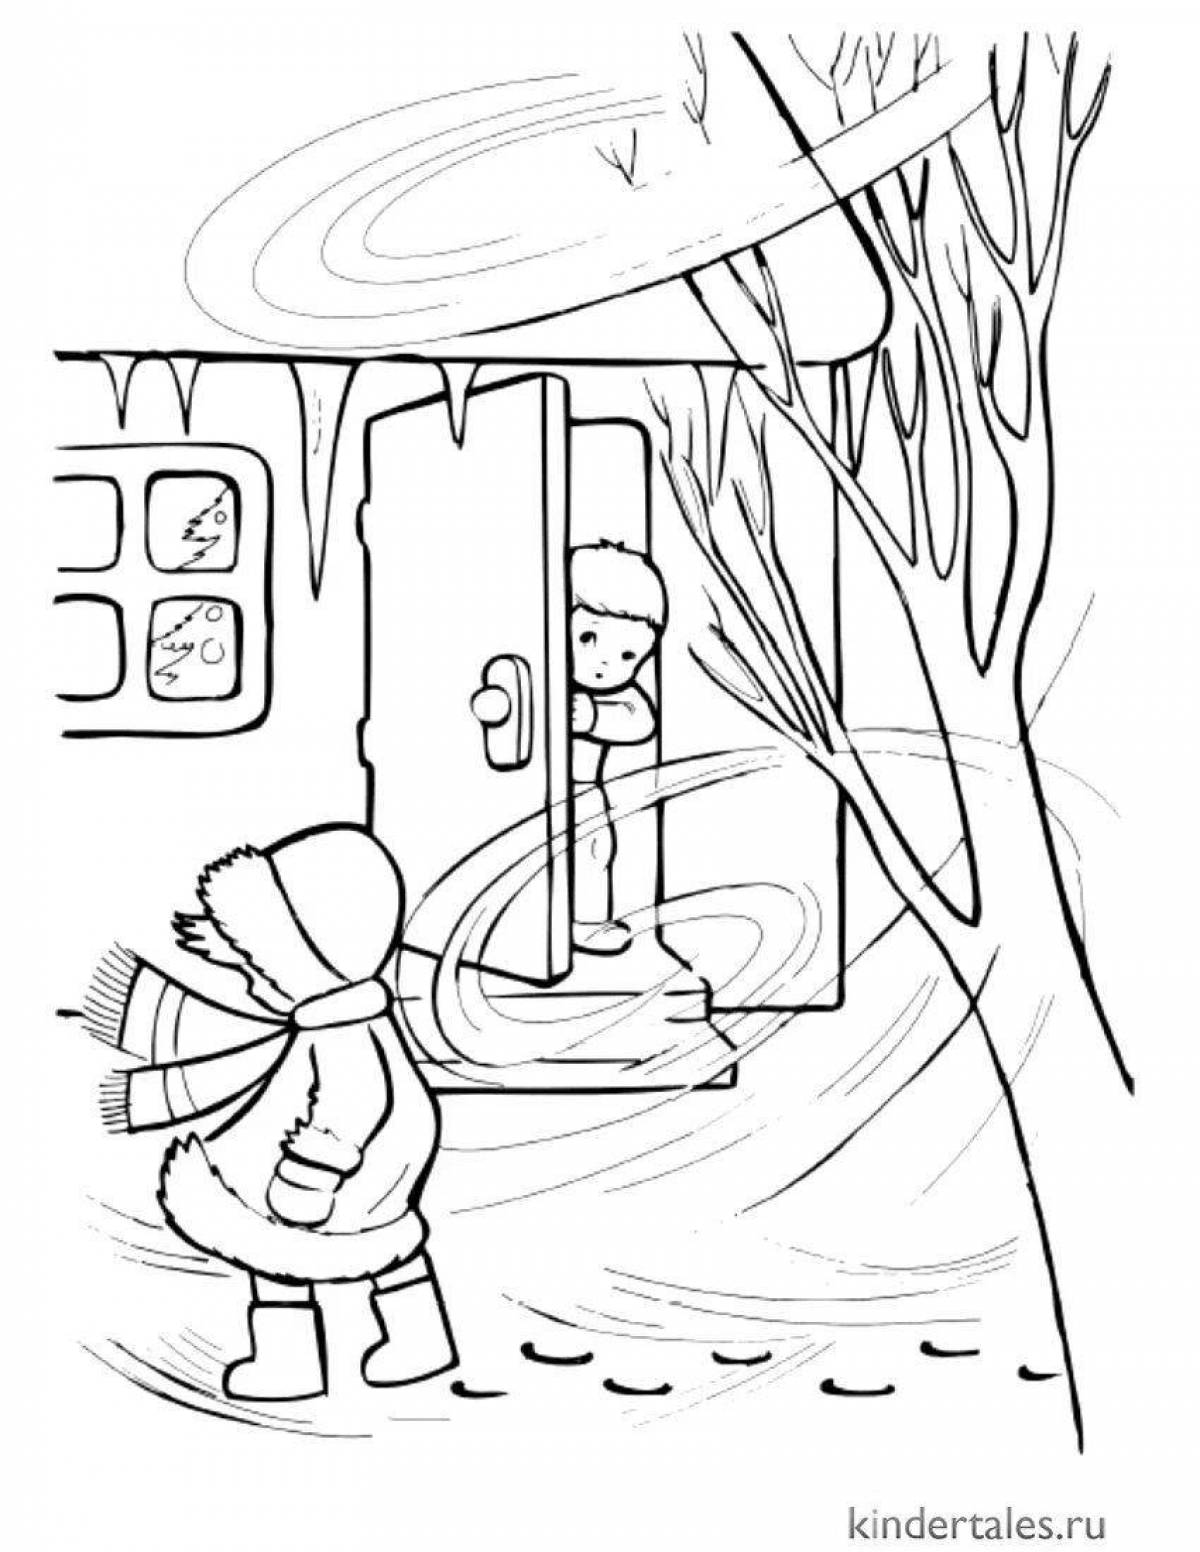 Friendly snowstorm coloring page